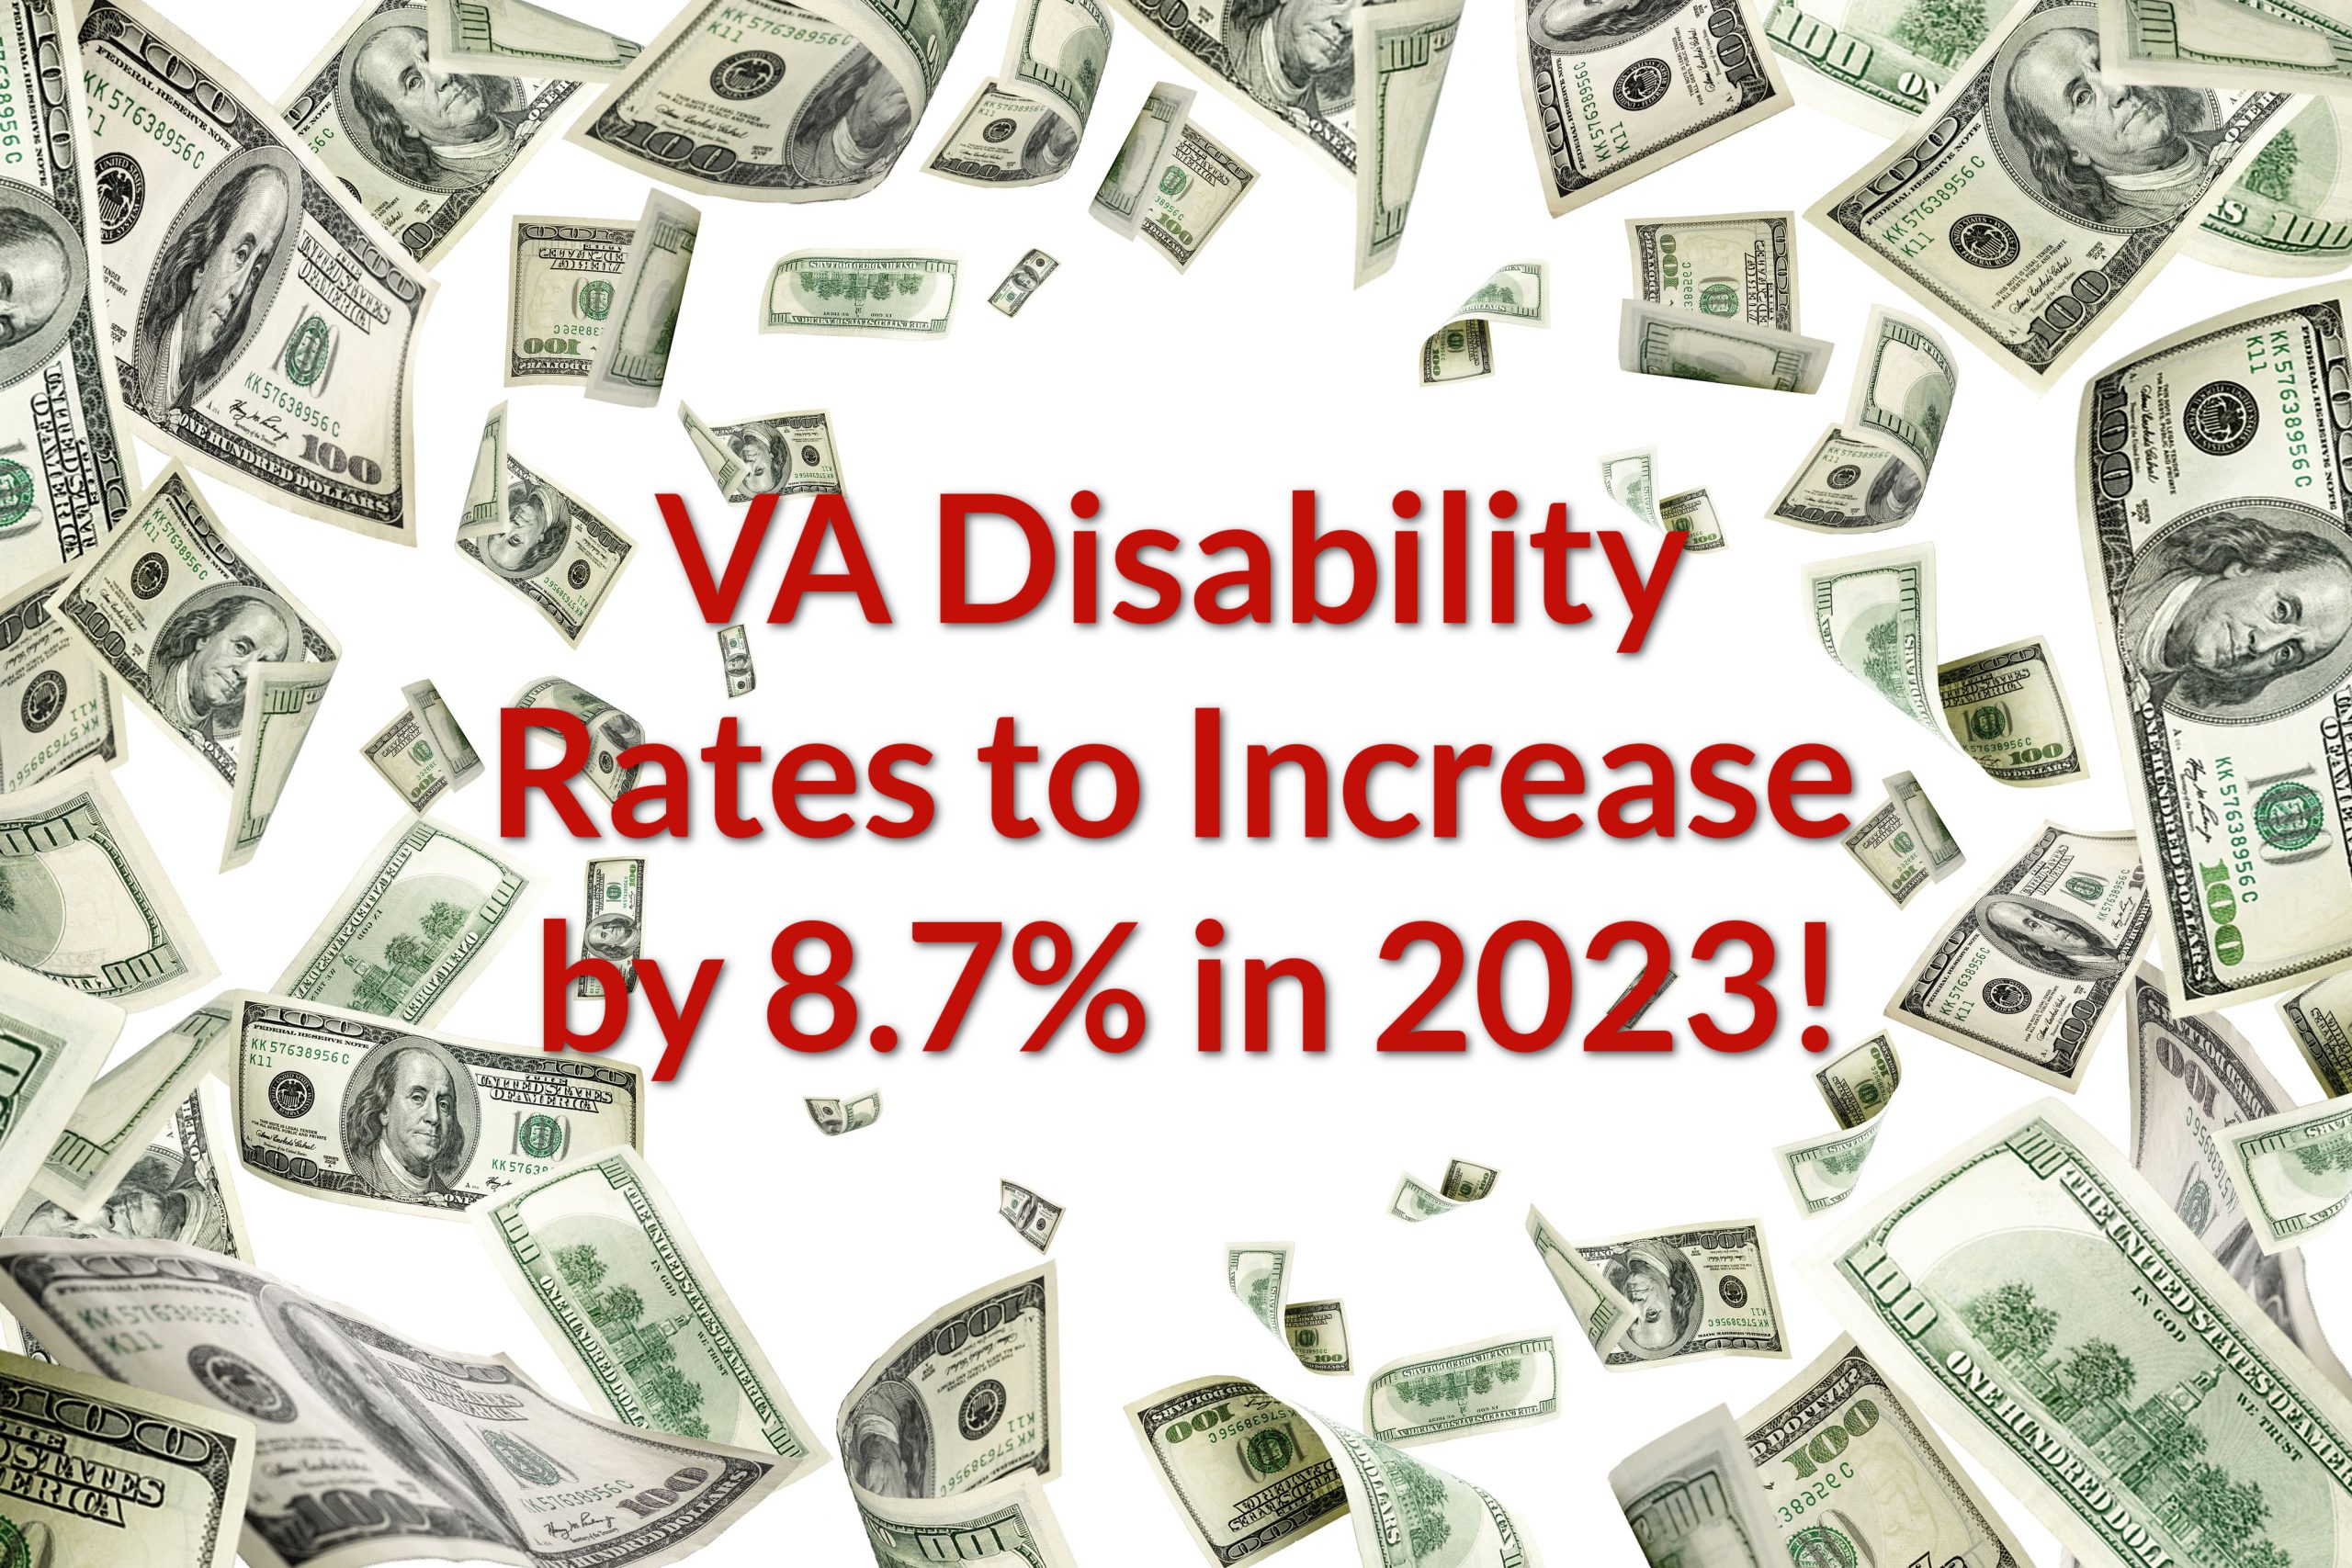 The Official 2023 VA Disability COLA is 8.7%